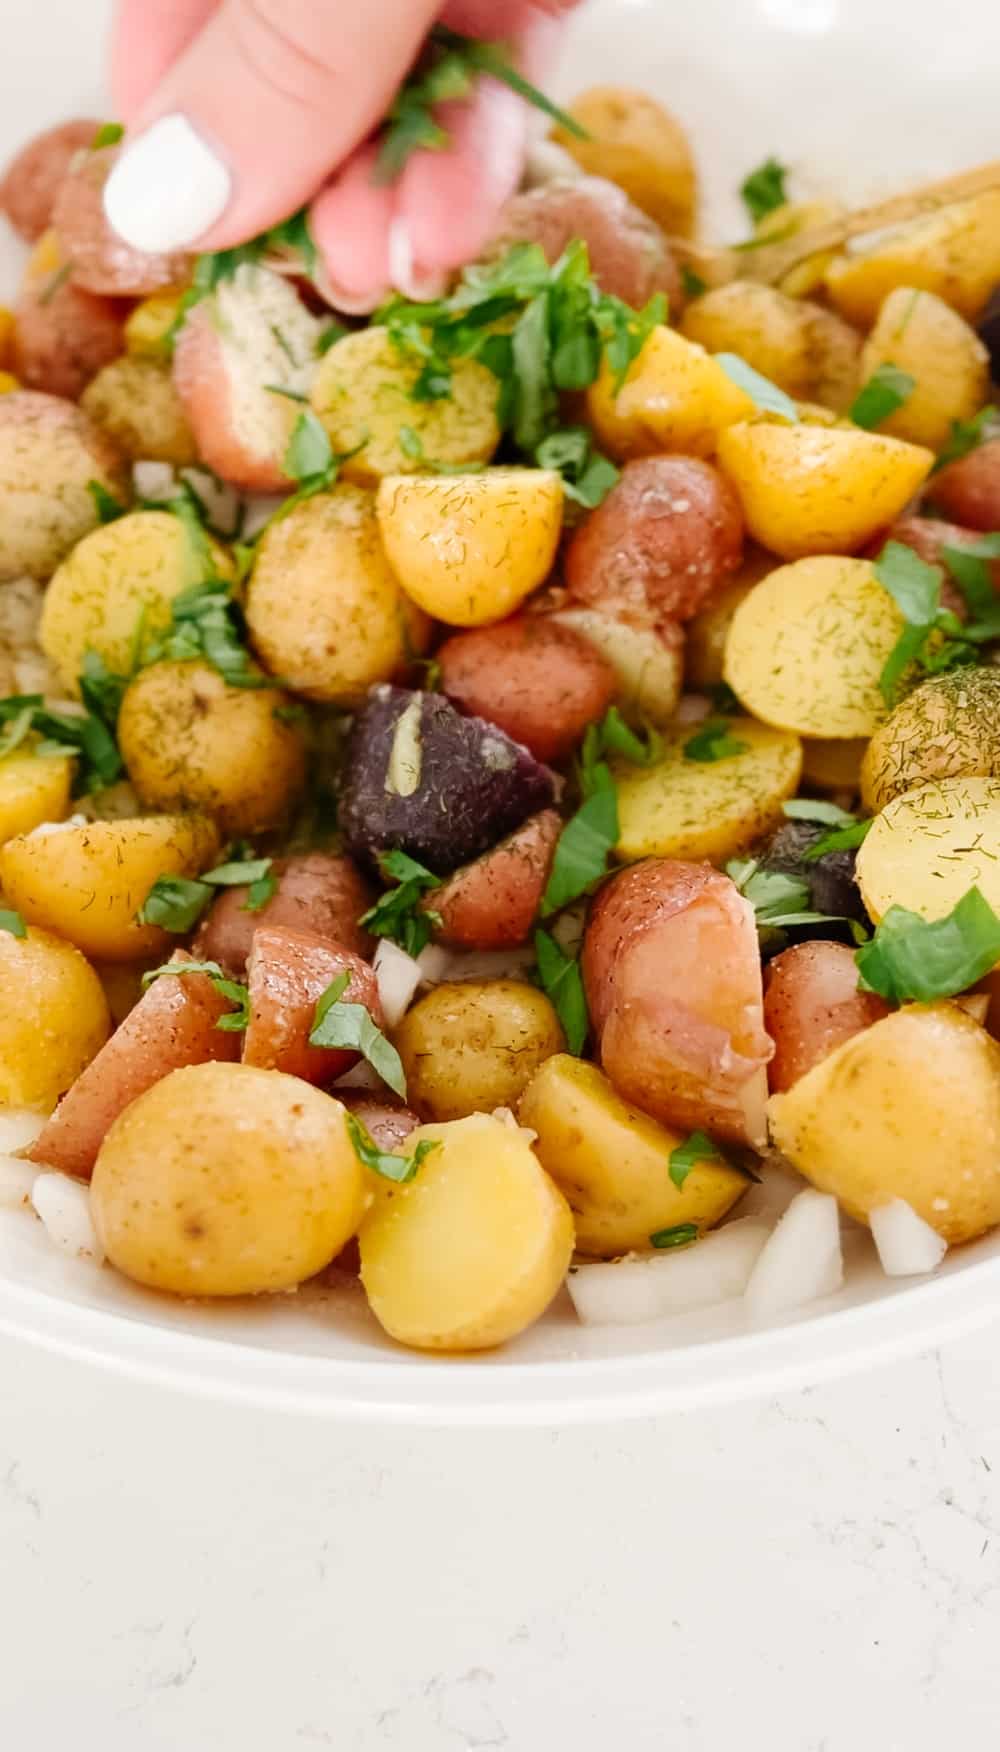 Sweet and Crunchy No Mayo Potato Salad. This lighter version potato salad is perfect for summer dinners and picnics with fresh herbs and a light vinaigrette dressing it hits the spot! 